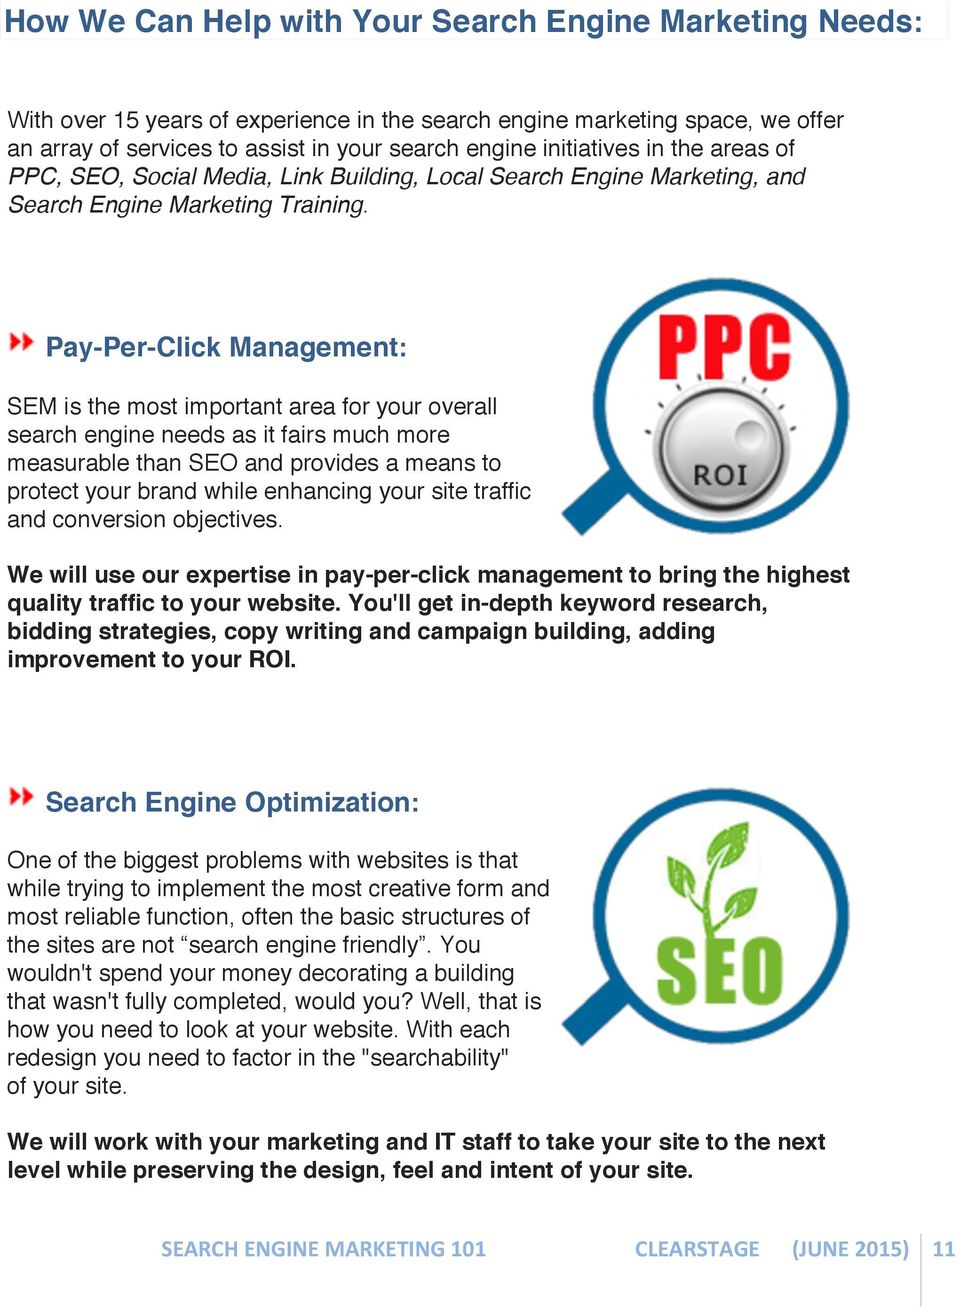 Pay-Per-Click Management: SEM is the most important area for your overall search engine needs as it fairs much more measurable than SEO and provides a means to protect your brand while enhancing your